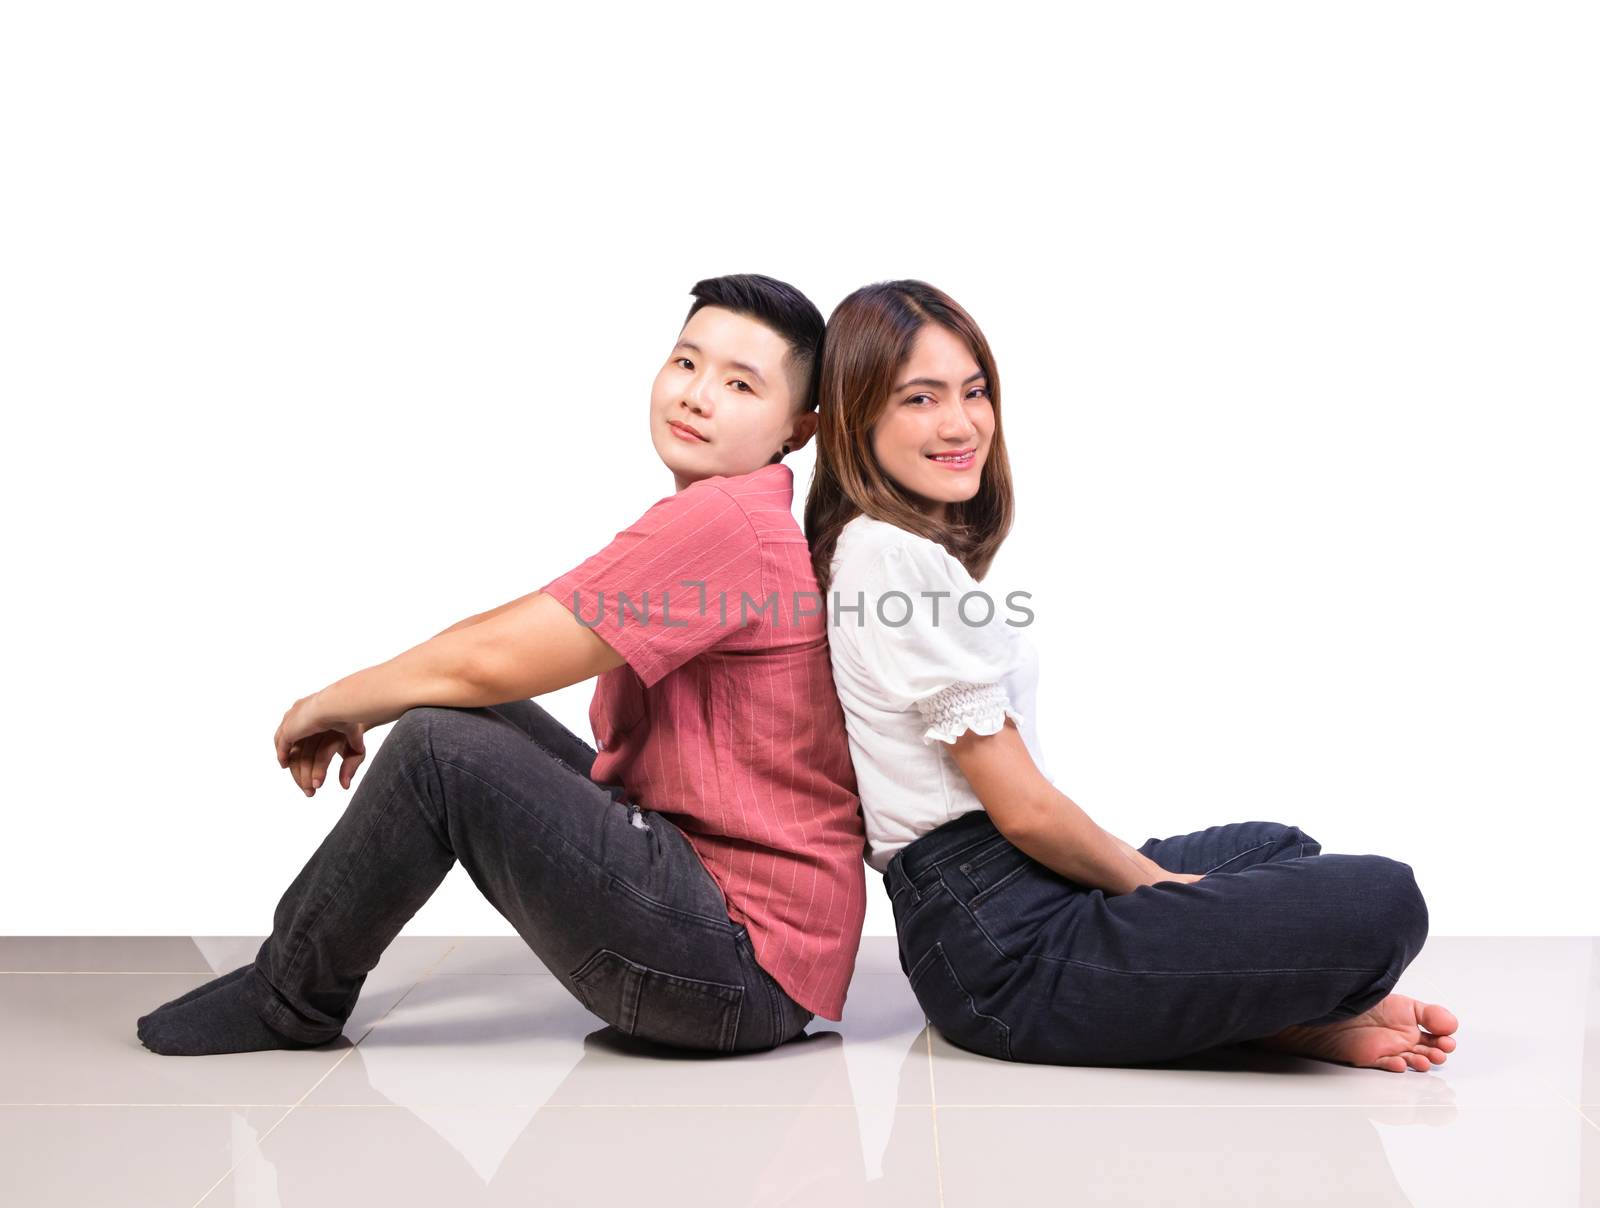 Two smiling woman young girls and happiness tomboy friends sitting back to back on tile floor in home with white background